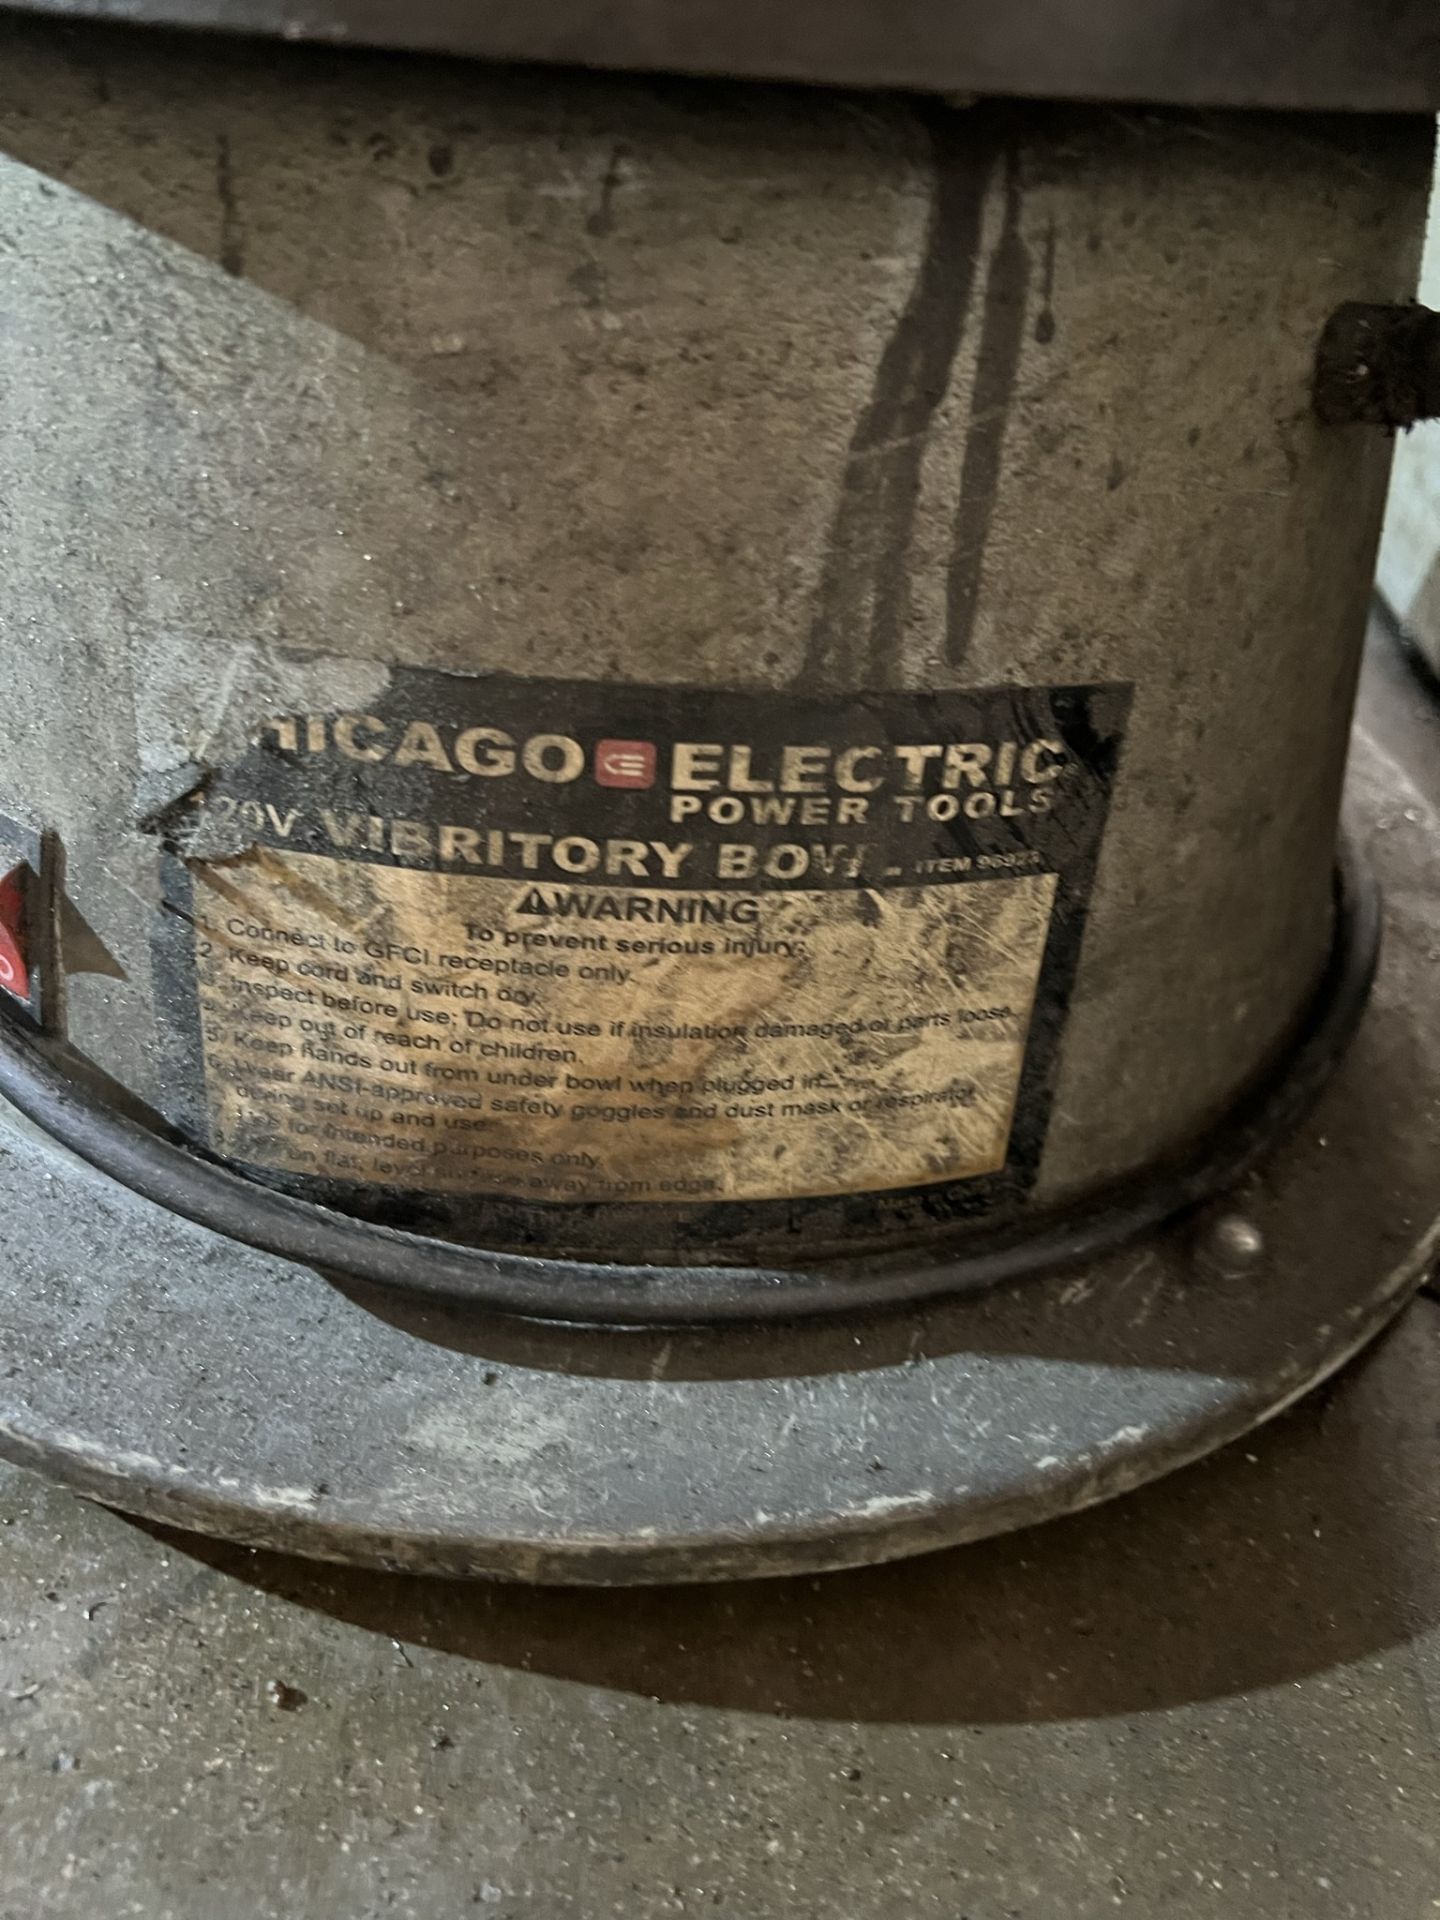 CHICAGO ELECTRIC VIBRATORY BOWL, BENCH TYPE - Image 3 of 3